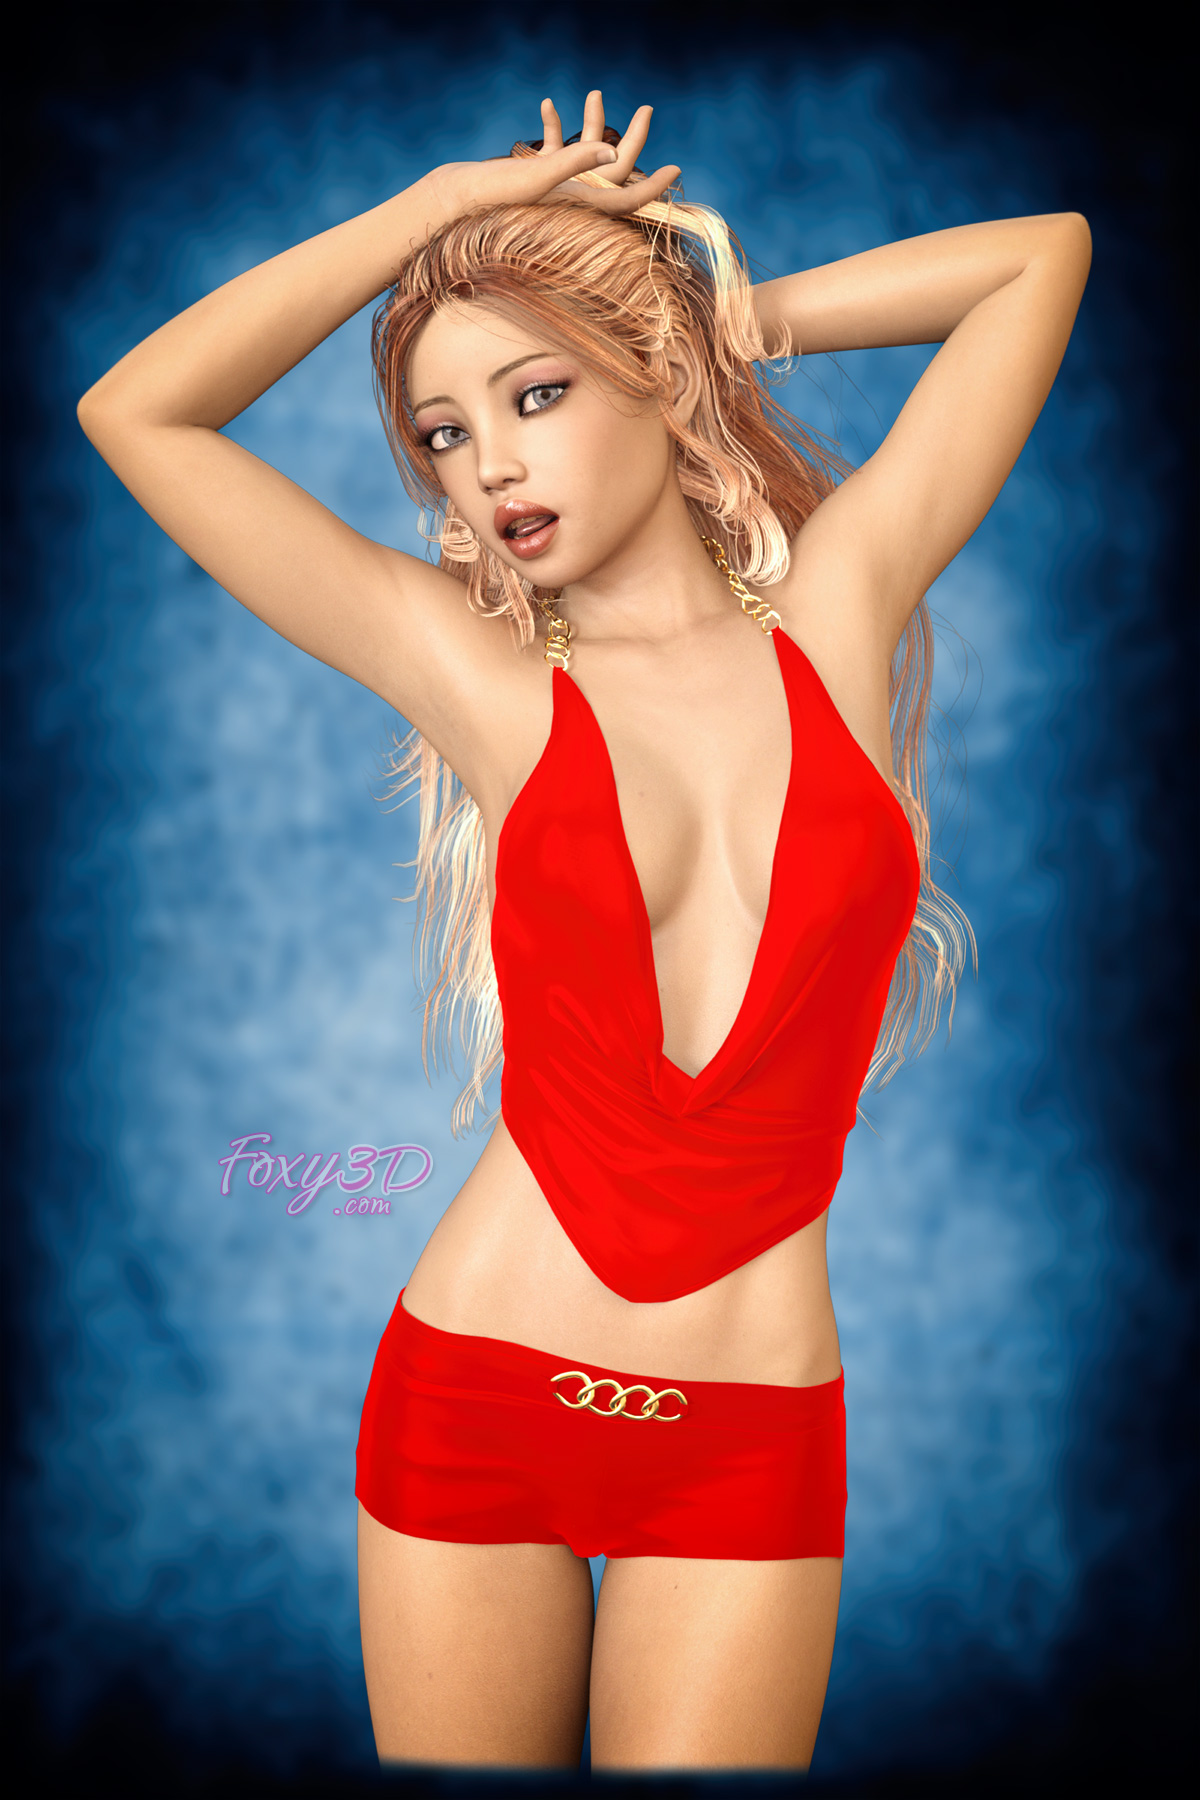 Ariel: Glamorous in Red